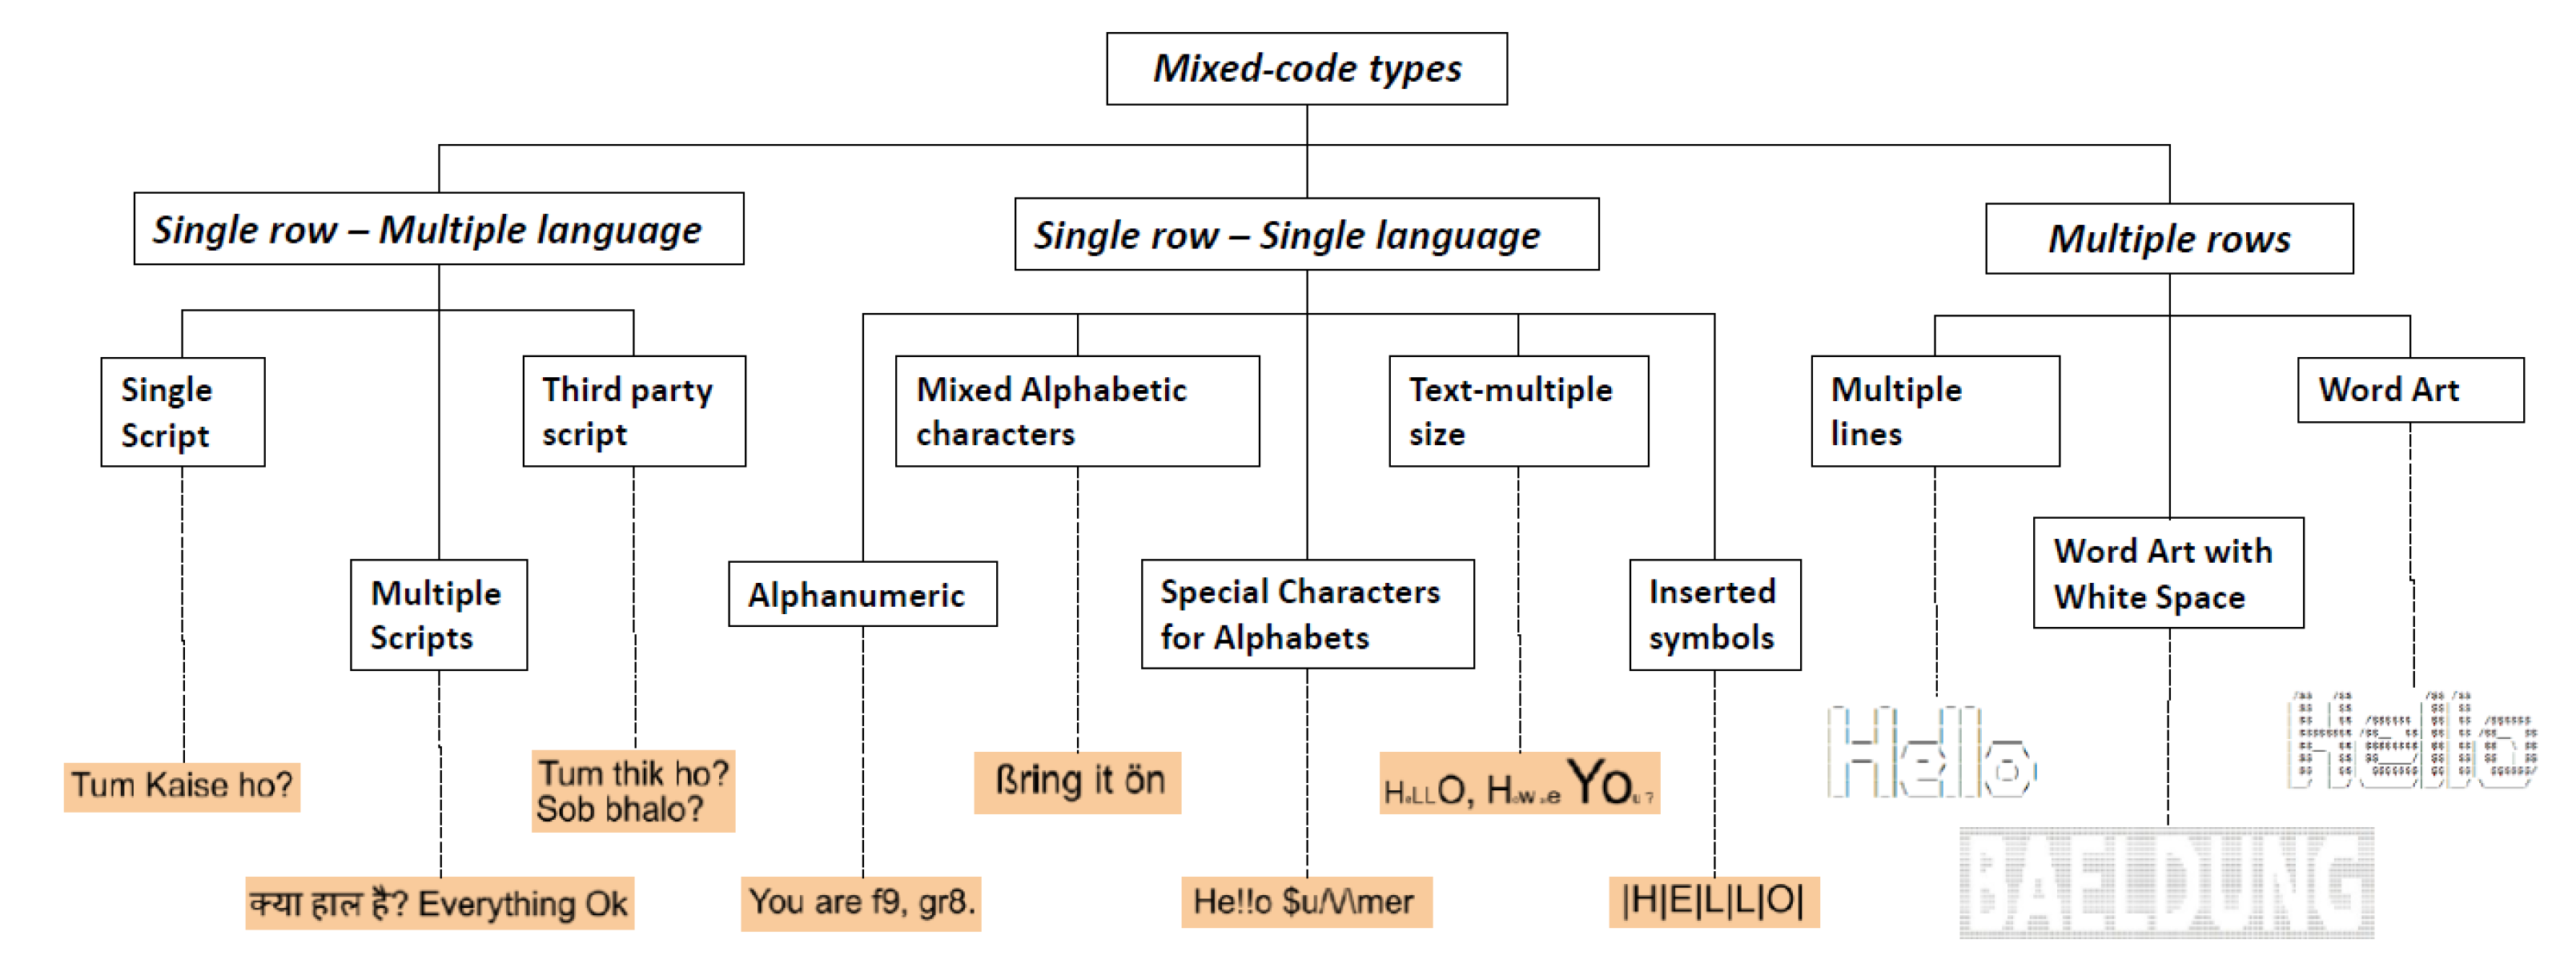 Applied Sciences Free Full Text An Algorithm For The Detection Of Hidden Propaganda In Mixed Code Text Over The Internet Html